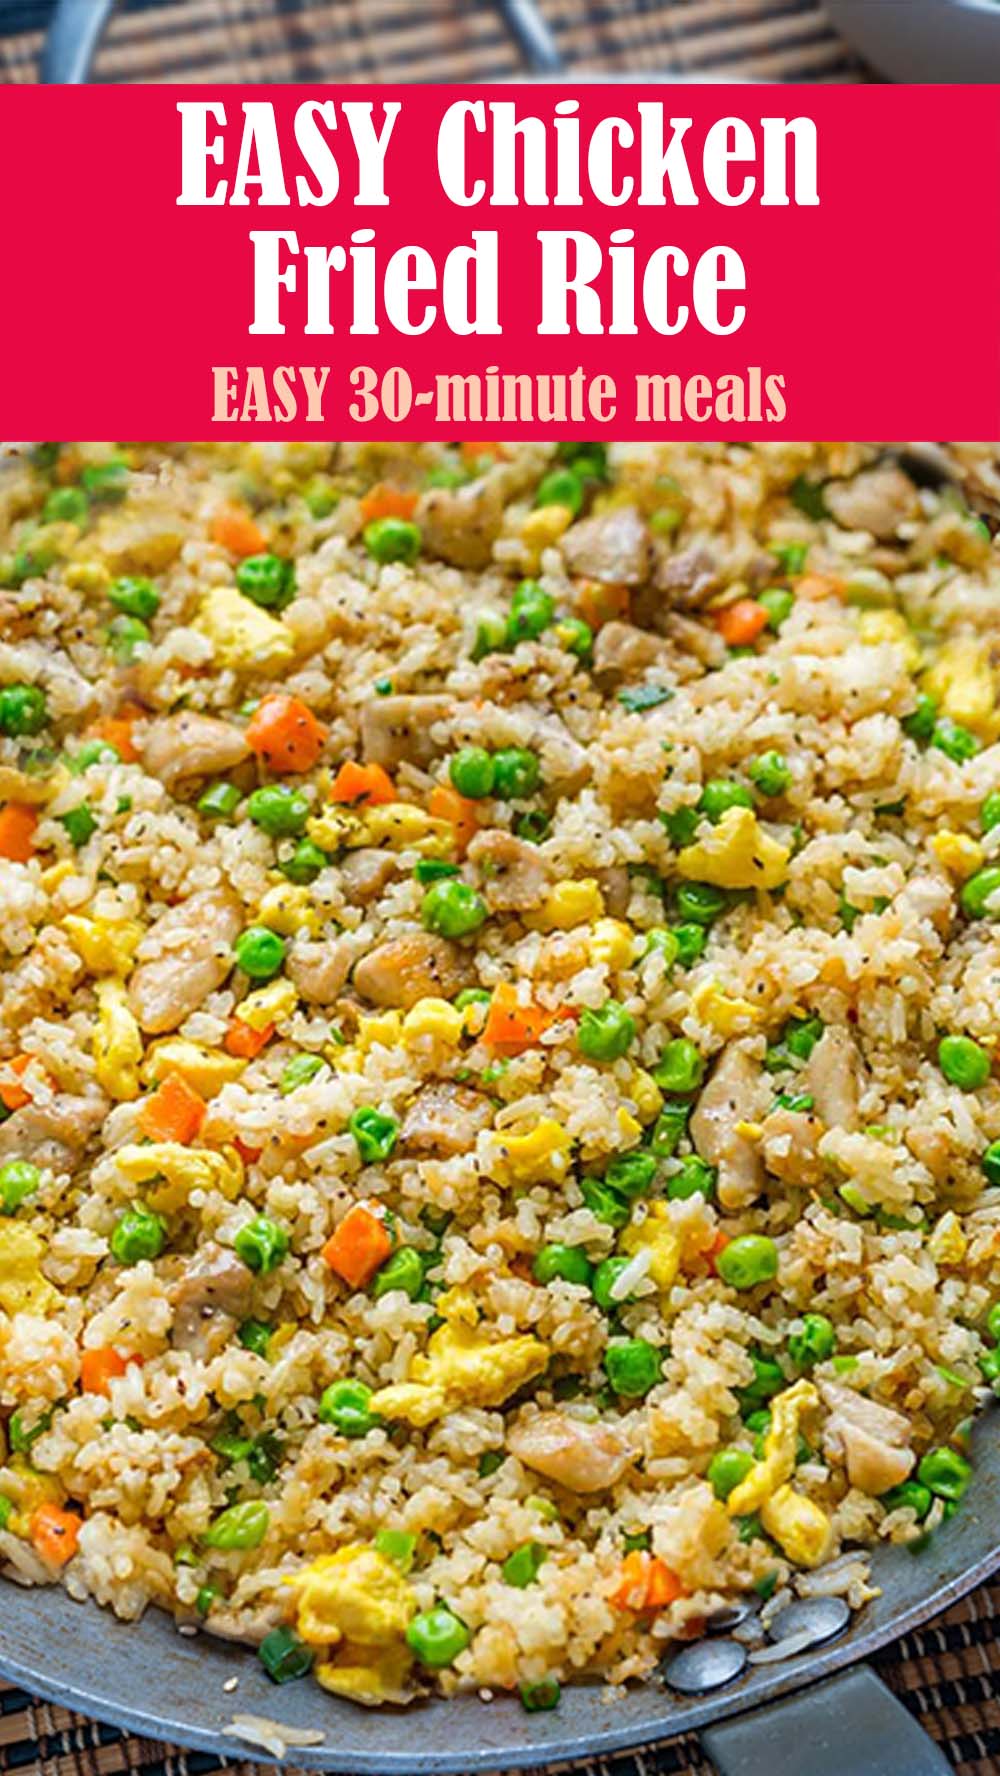 EASY Chicken Fried Rice